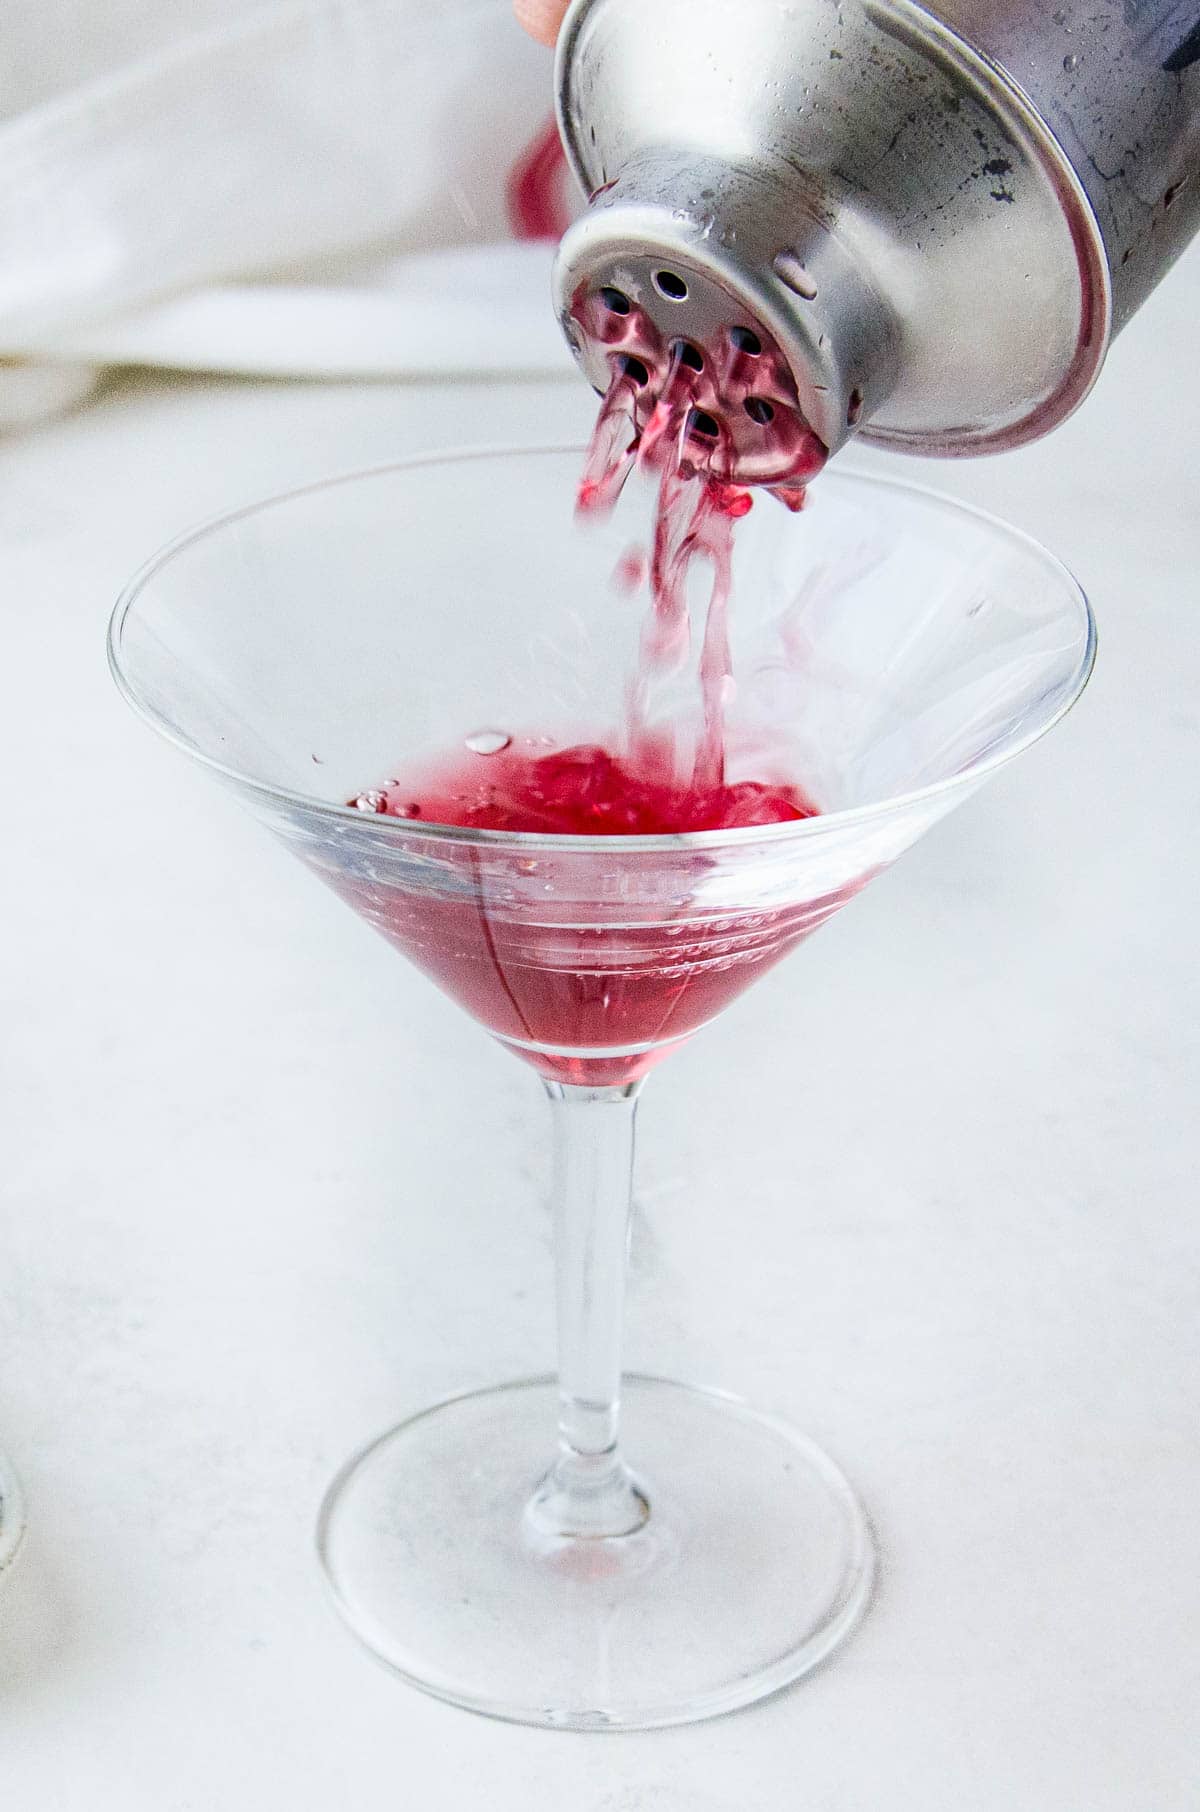 Straining the red drink into a martini glass.